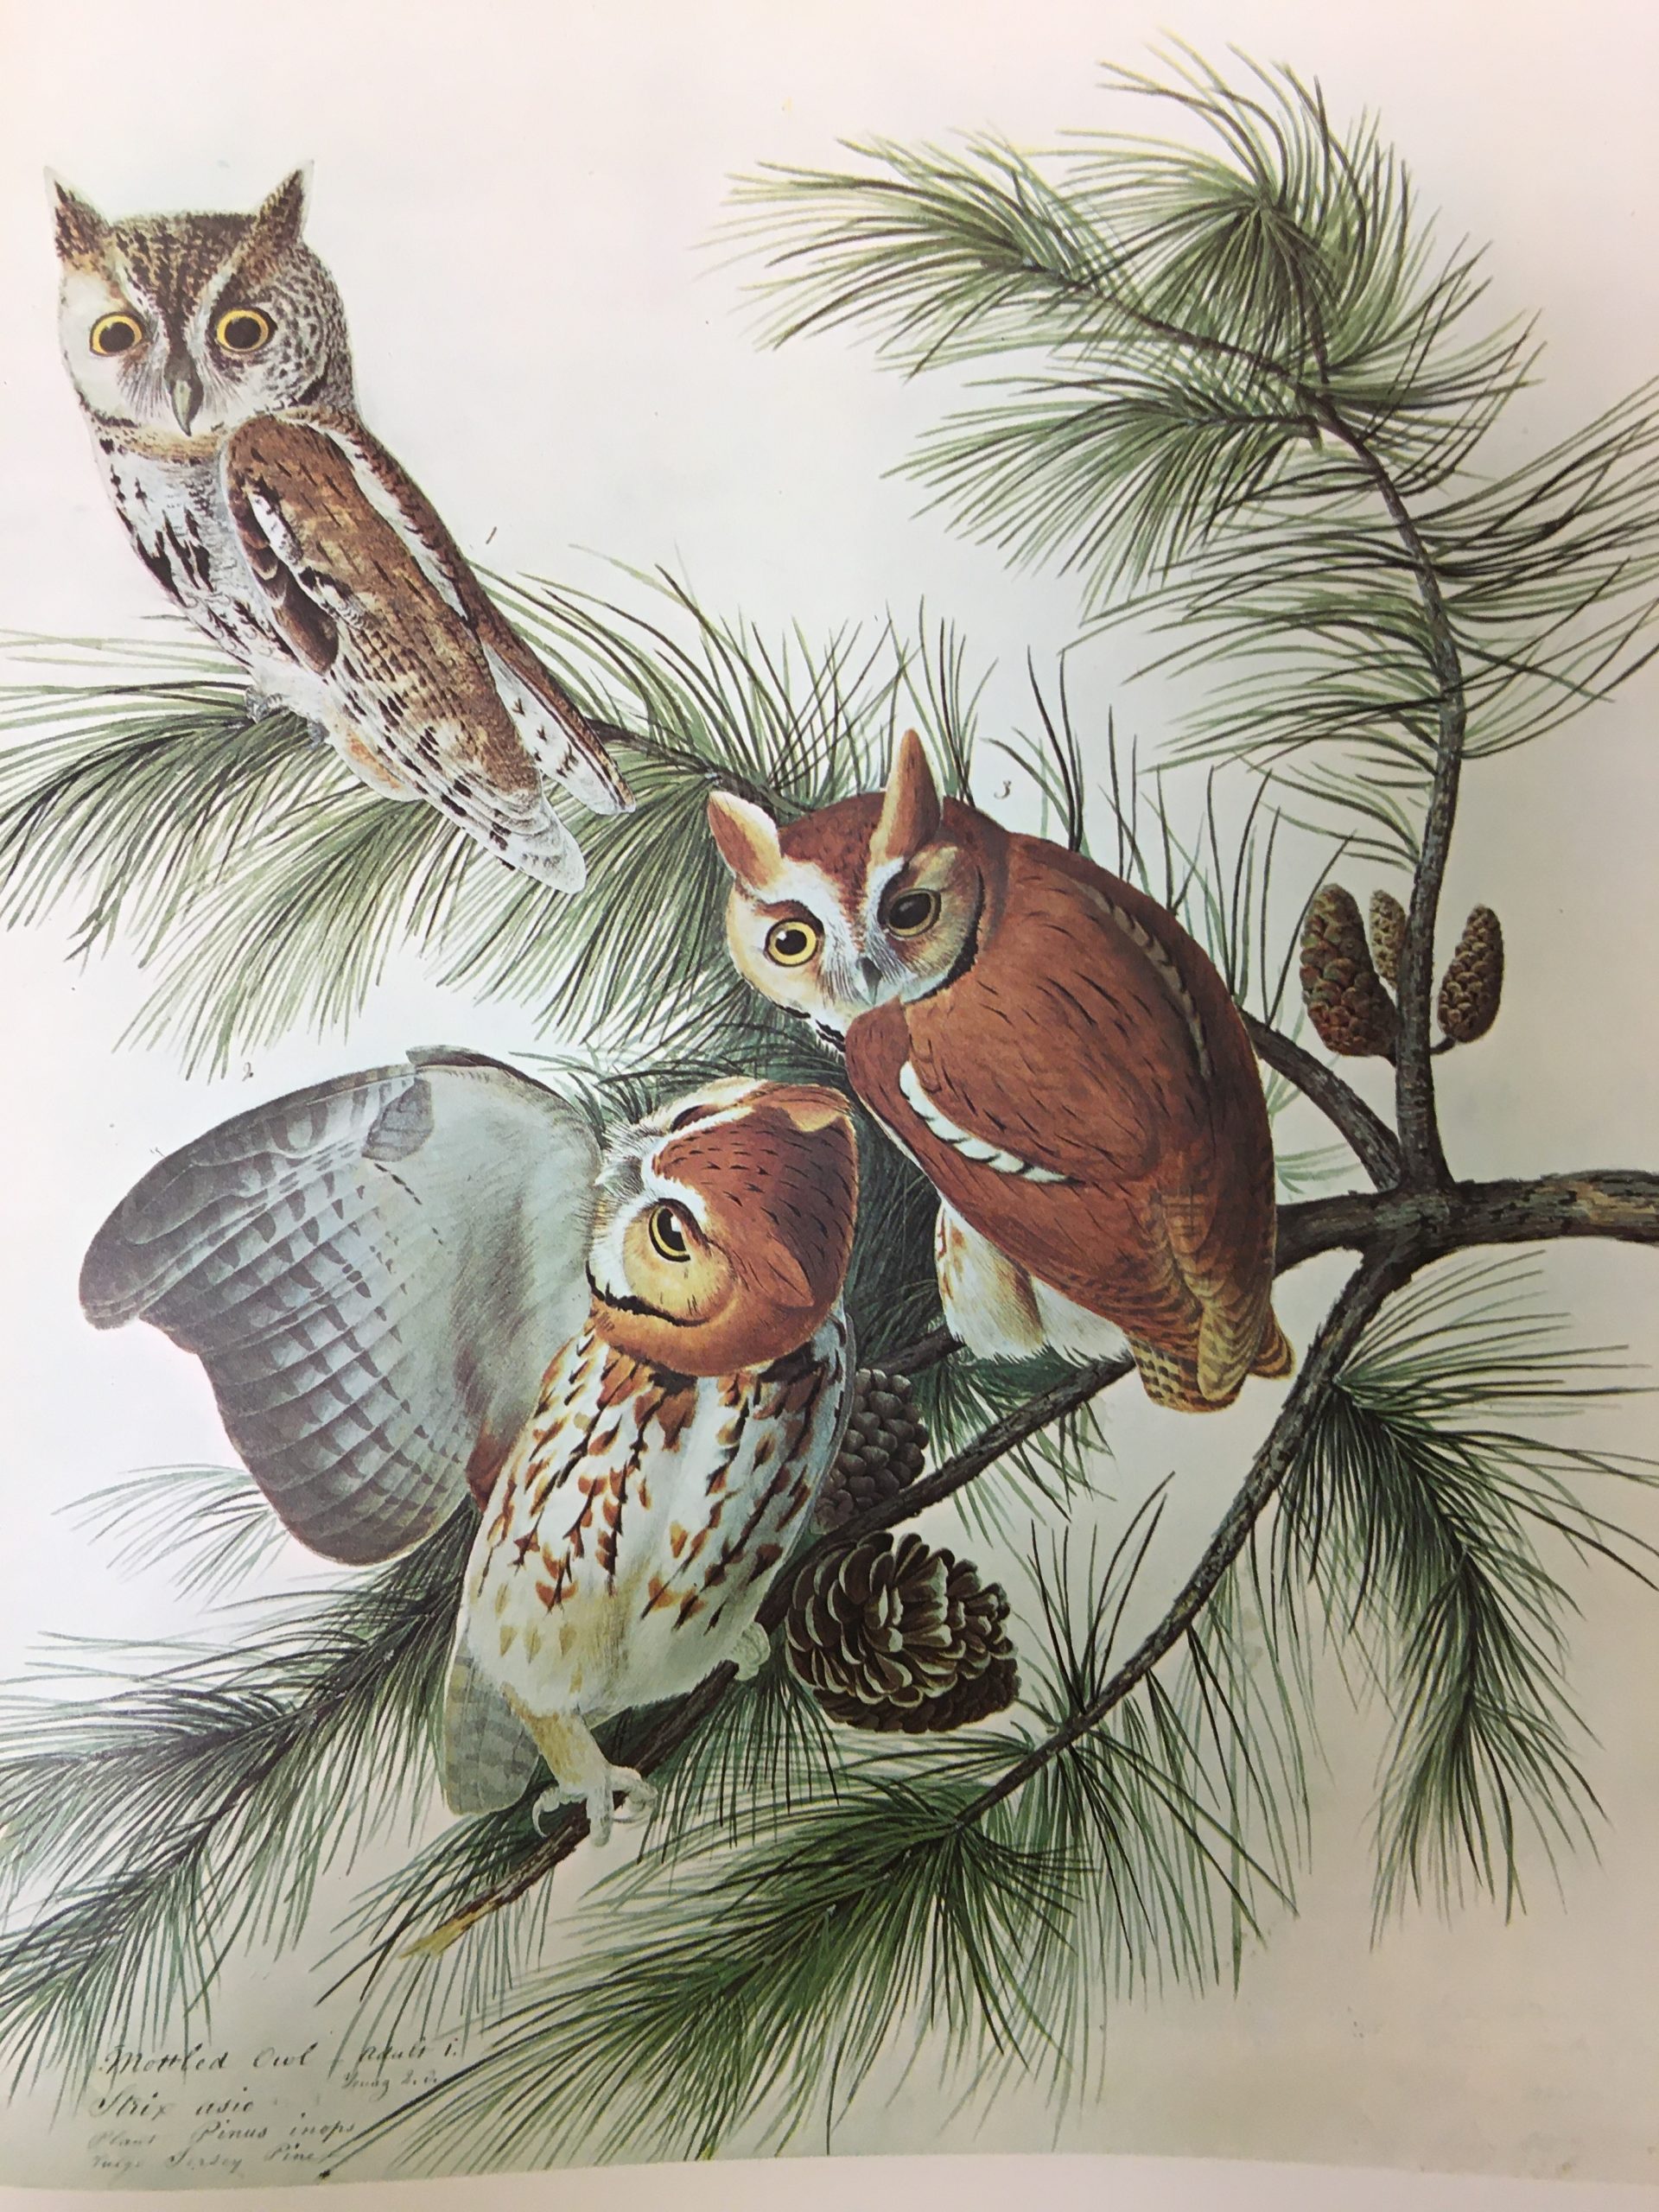 A print of Little Screech Owl. From "The Birds of America" by John James Audubon. Three owls pictured in various life stages perch on a fir branch.